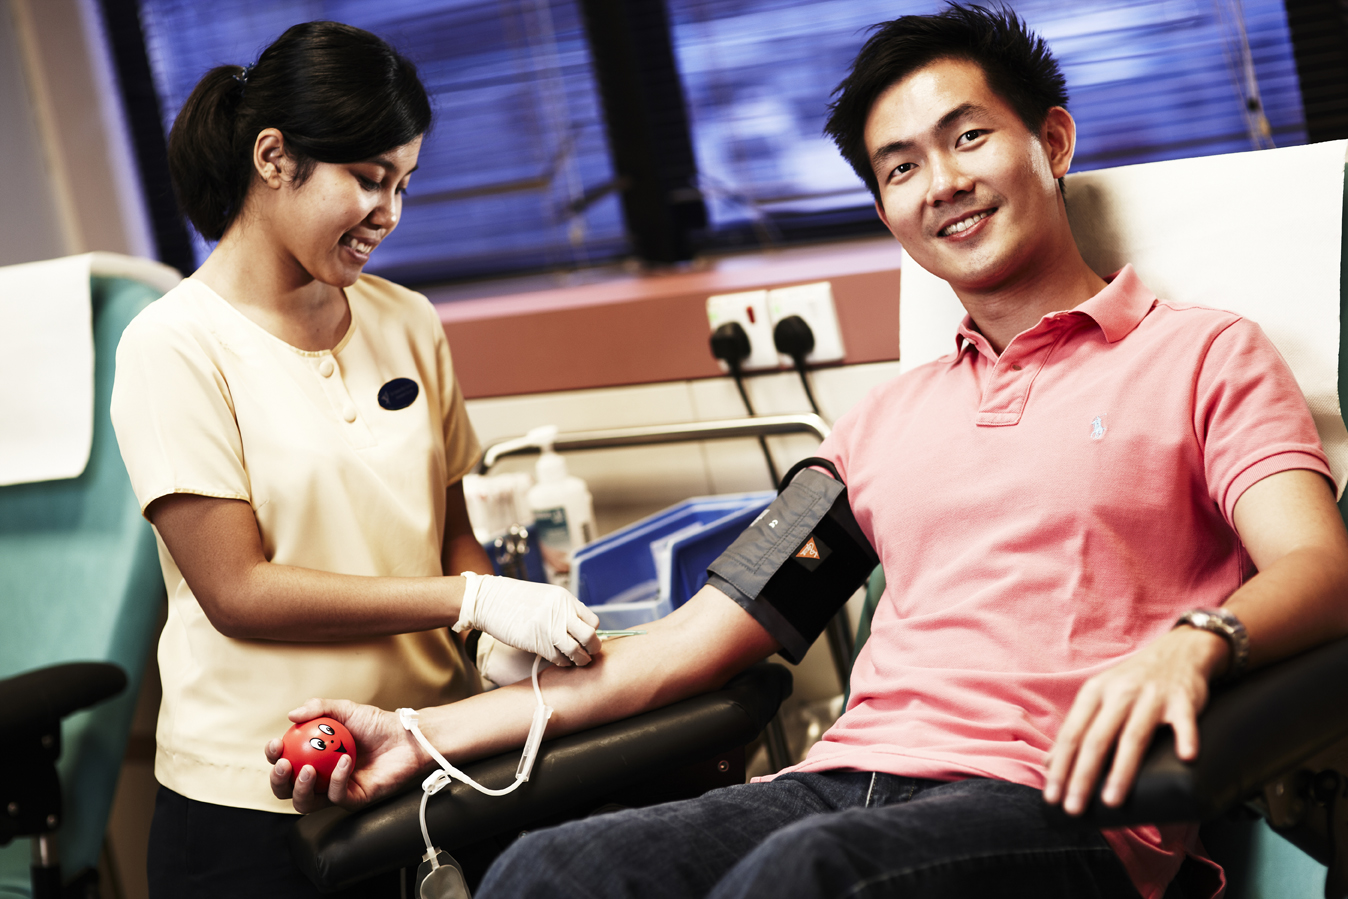 A blood donation session can last between 5 to 10 minutes.